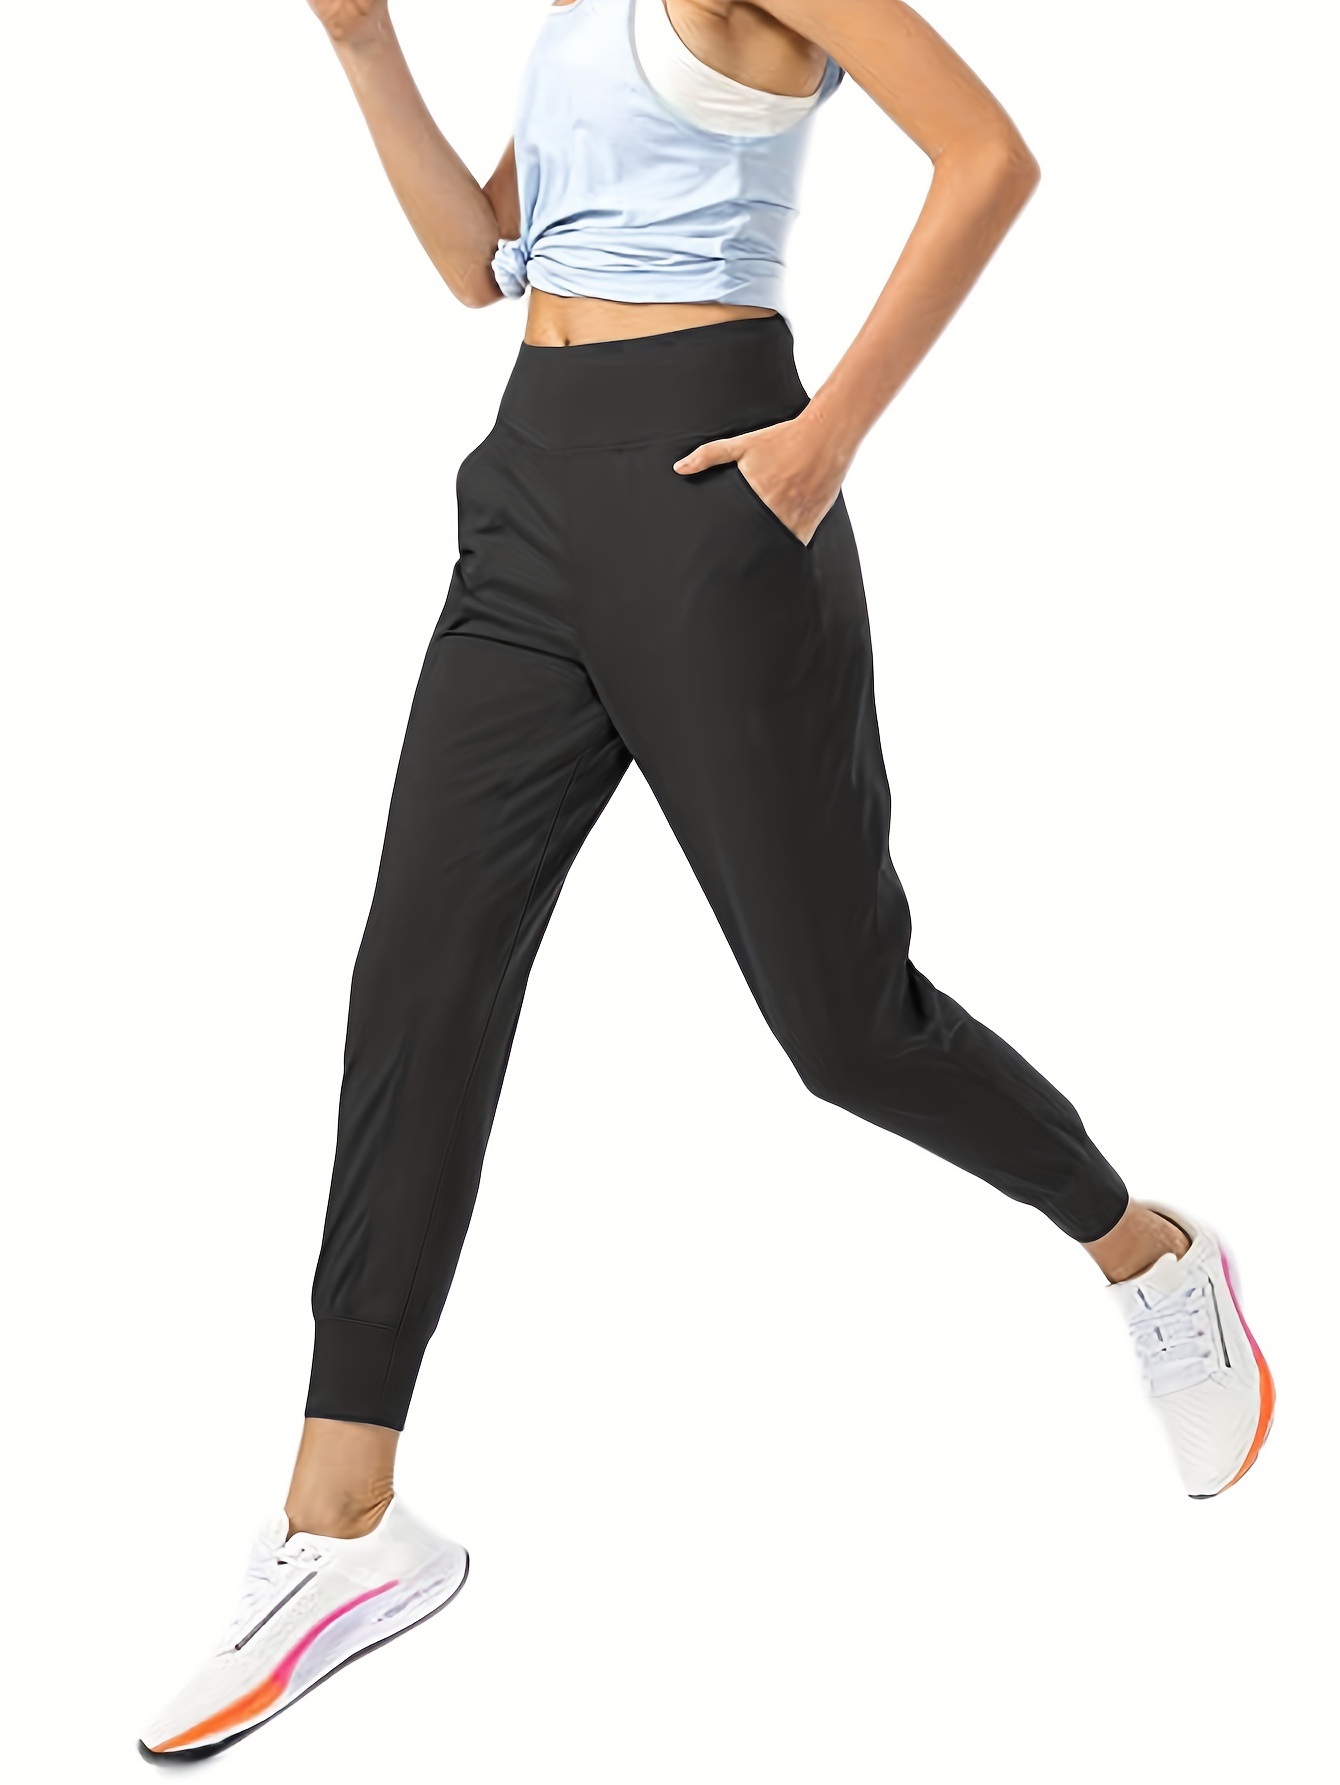 High Waist Yoga Pants with Zipper Pocket - Women's Activewear for Running,  Cycling, and Gym Workouts